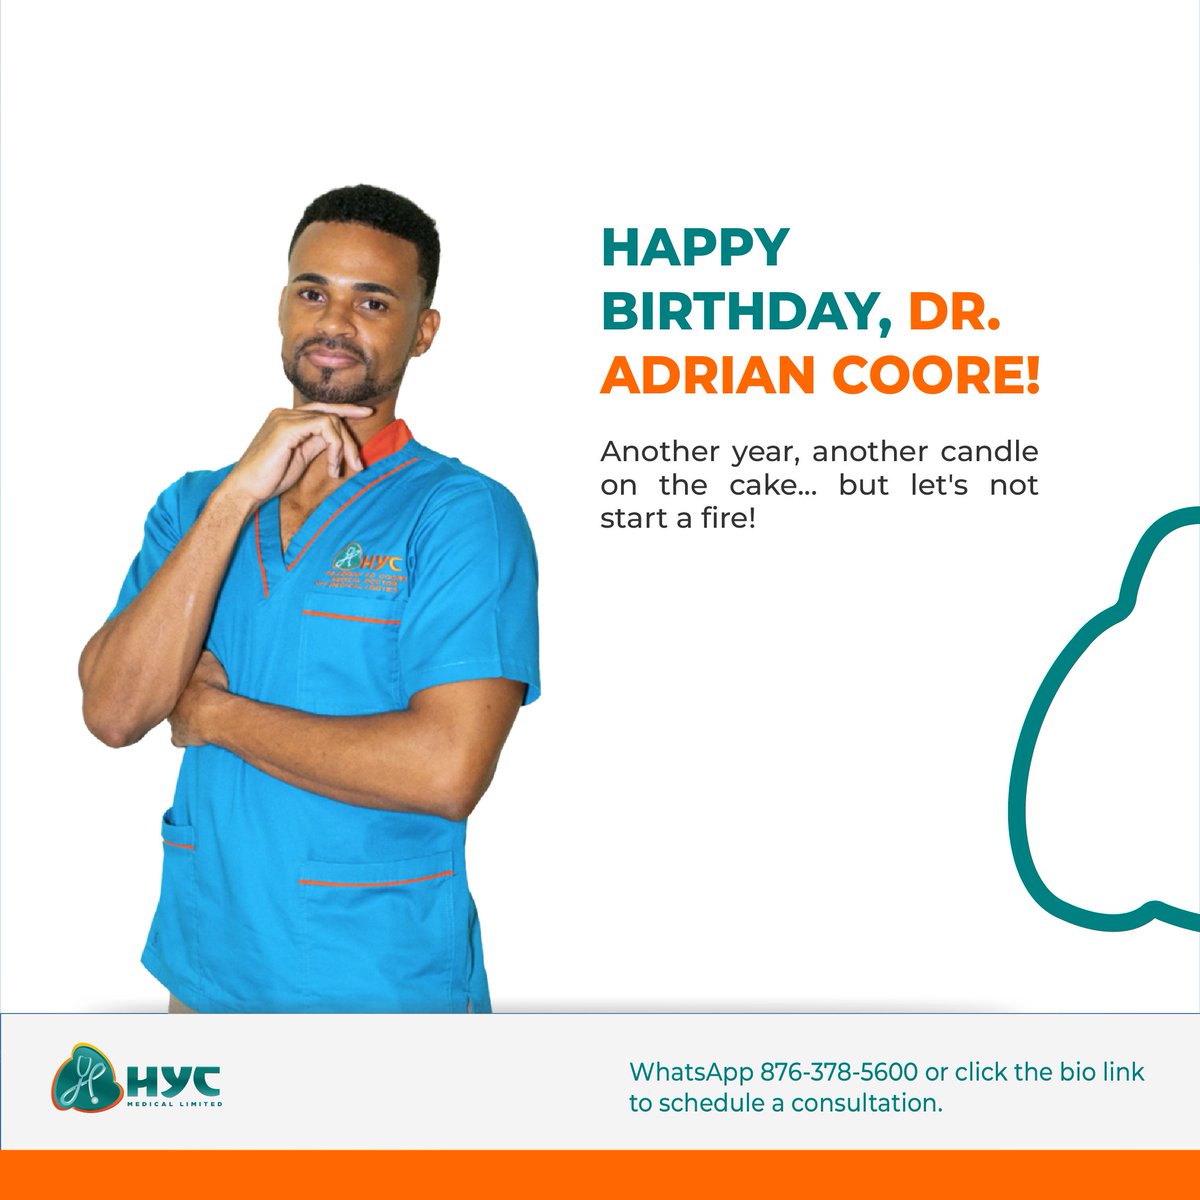 Happy Birthday to the amazing Dr. Adrian Coore of HYC Medical! Your dedication to healthcare and compassion for others inspire us all. Here's to another year of making a difference and spreading joy! #HappyBirthday #HYCMedical #HealthcareHero